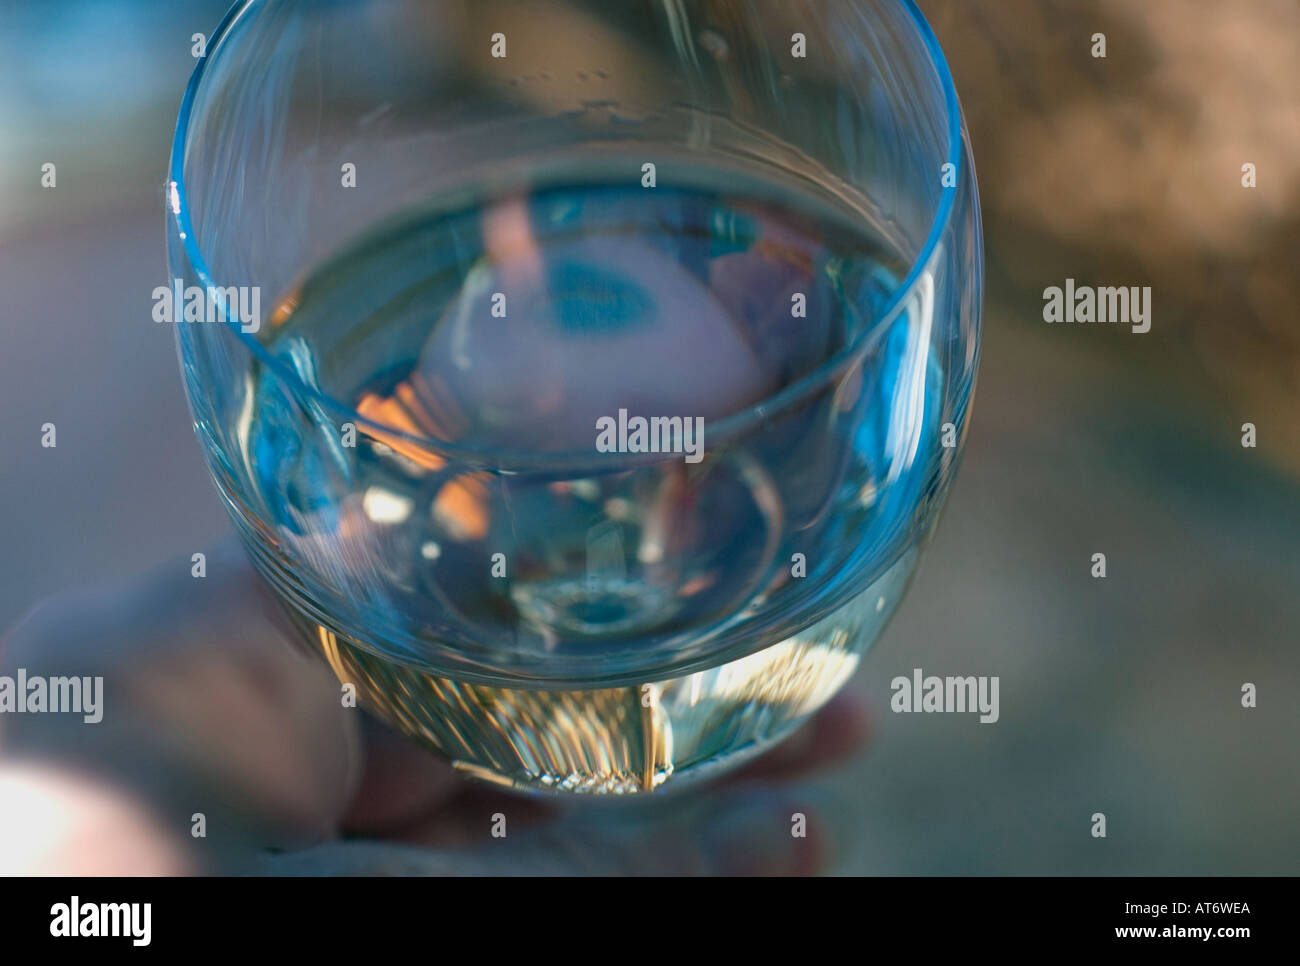 Drinker's eye view into a hand held wineglass containing white wine Stock Photo